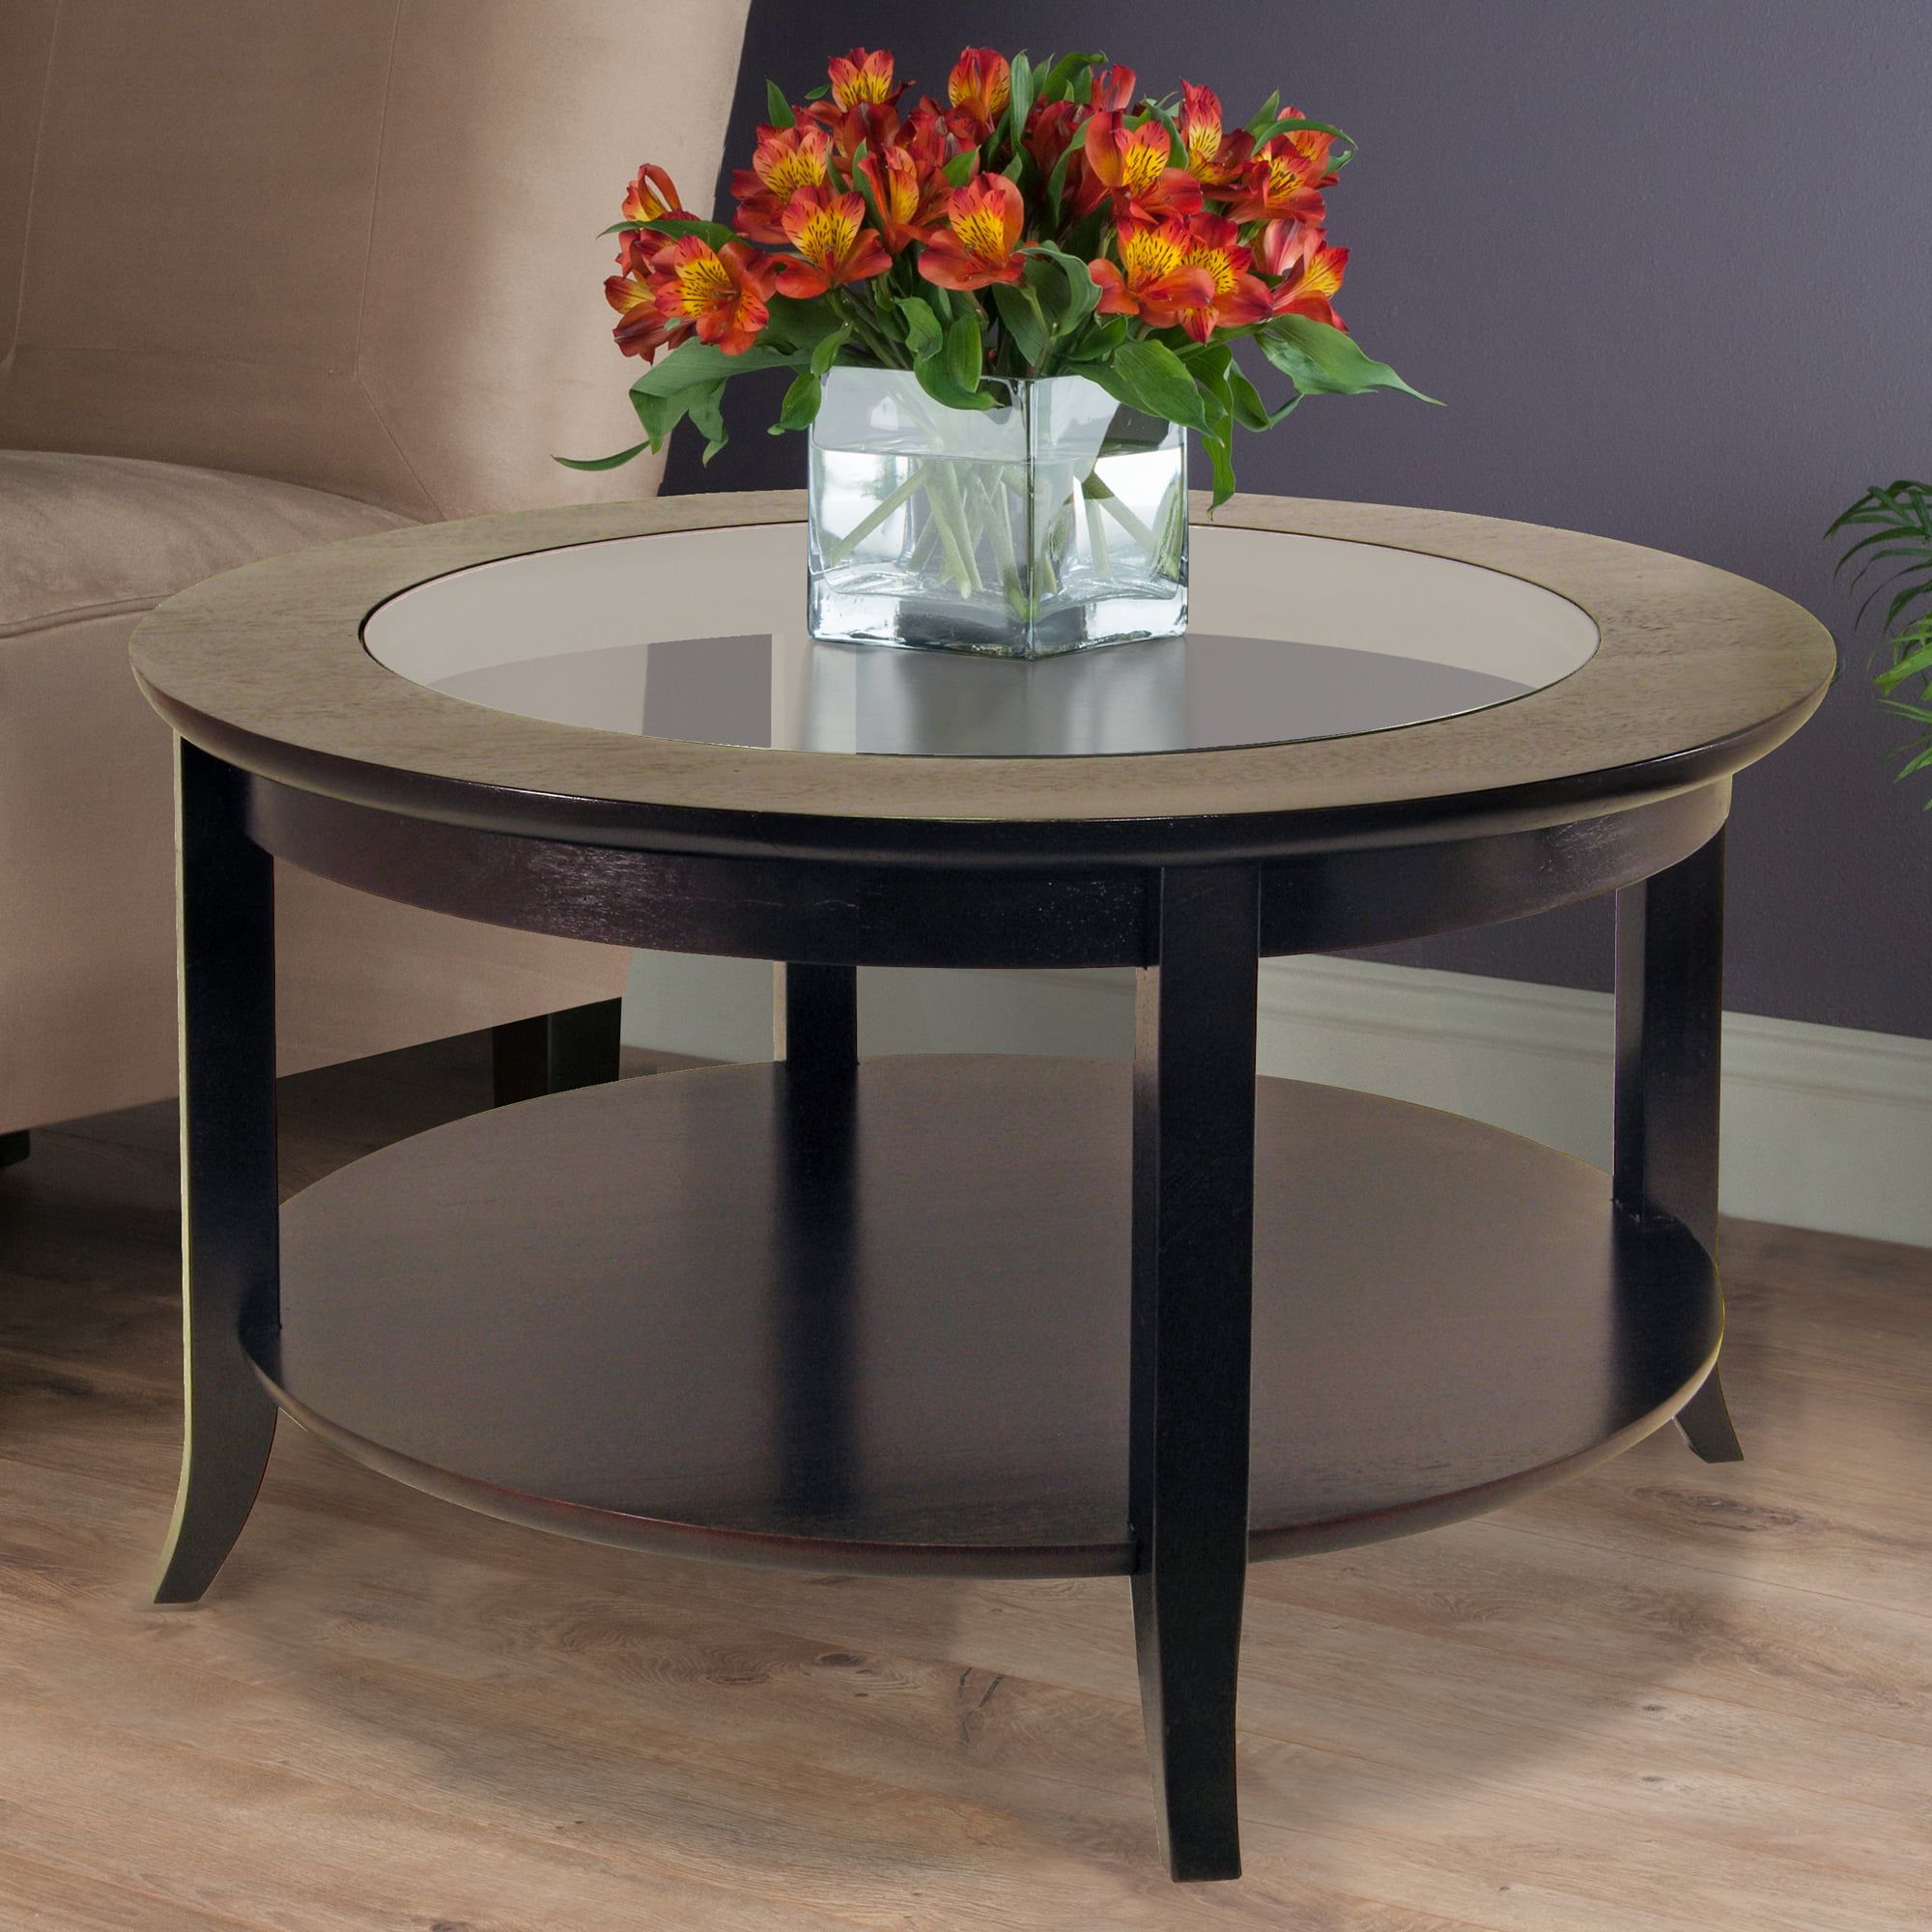 Winsome Wood Genoa Round Coffee Table With Glass Top, Espresso Finish Within Round Coffee Tables (View 4 of 15)